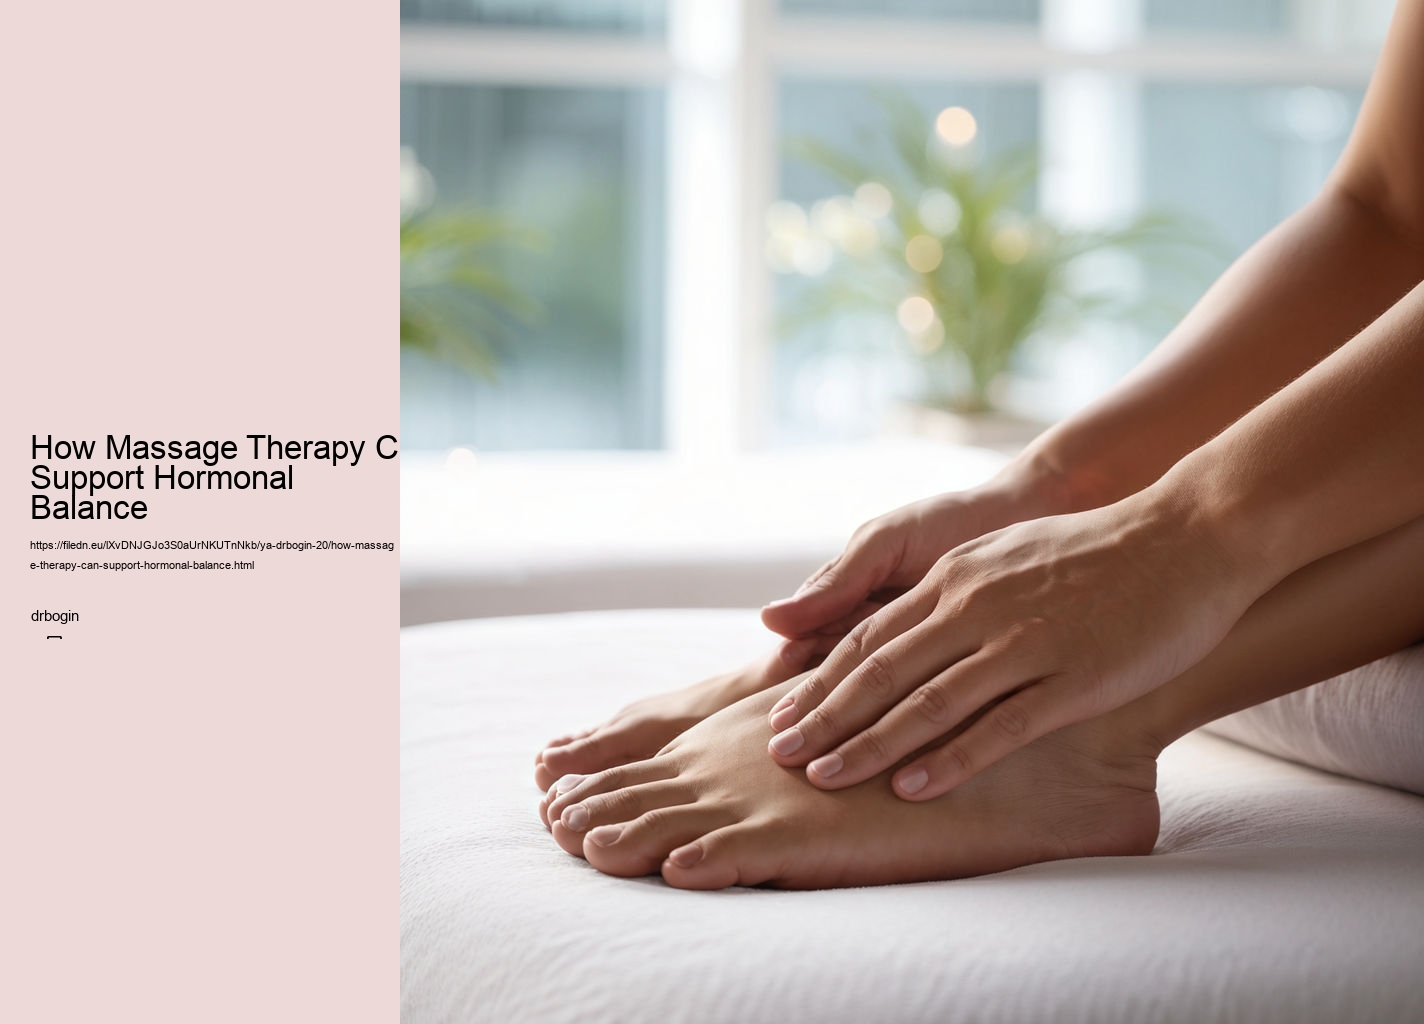 How Massage Therapy Can Support Hormonal Balance